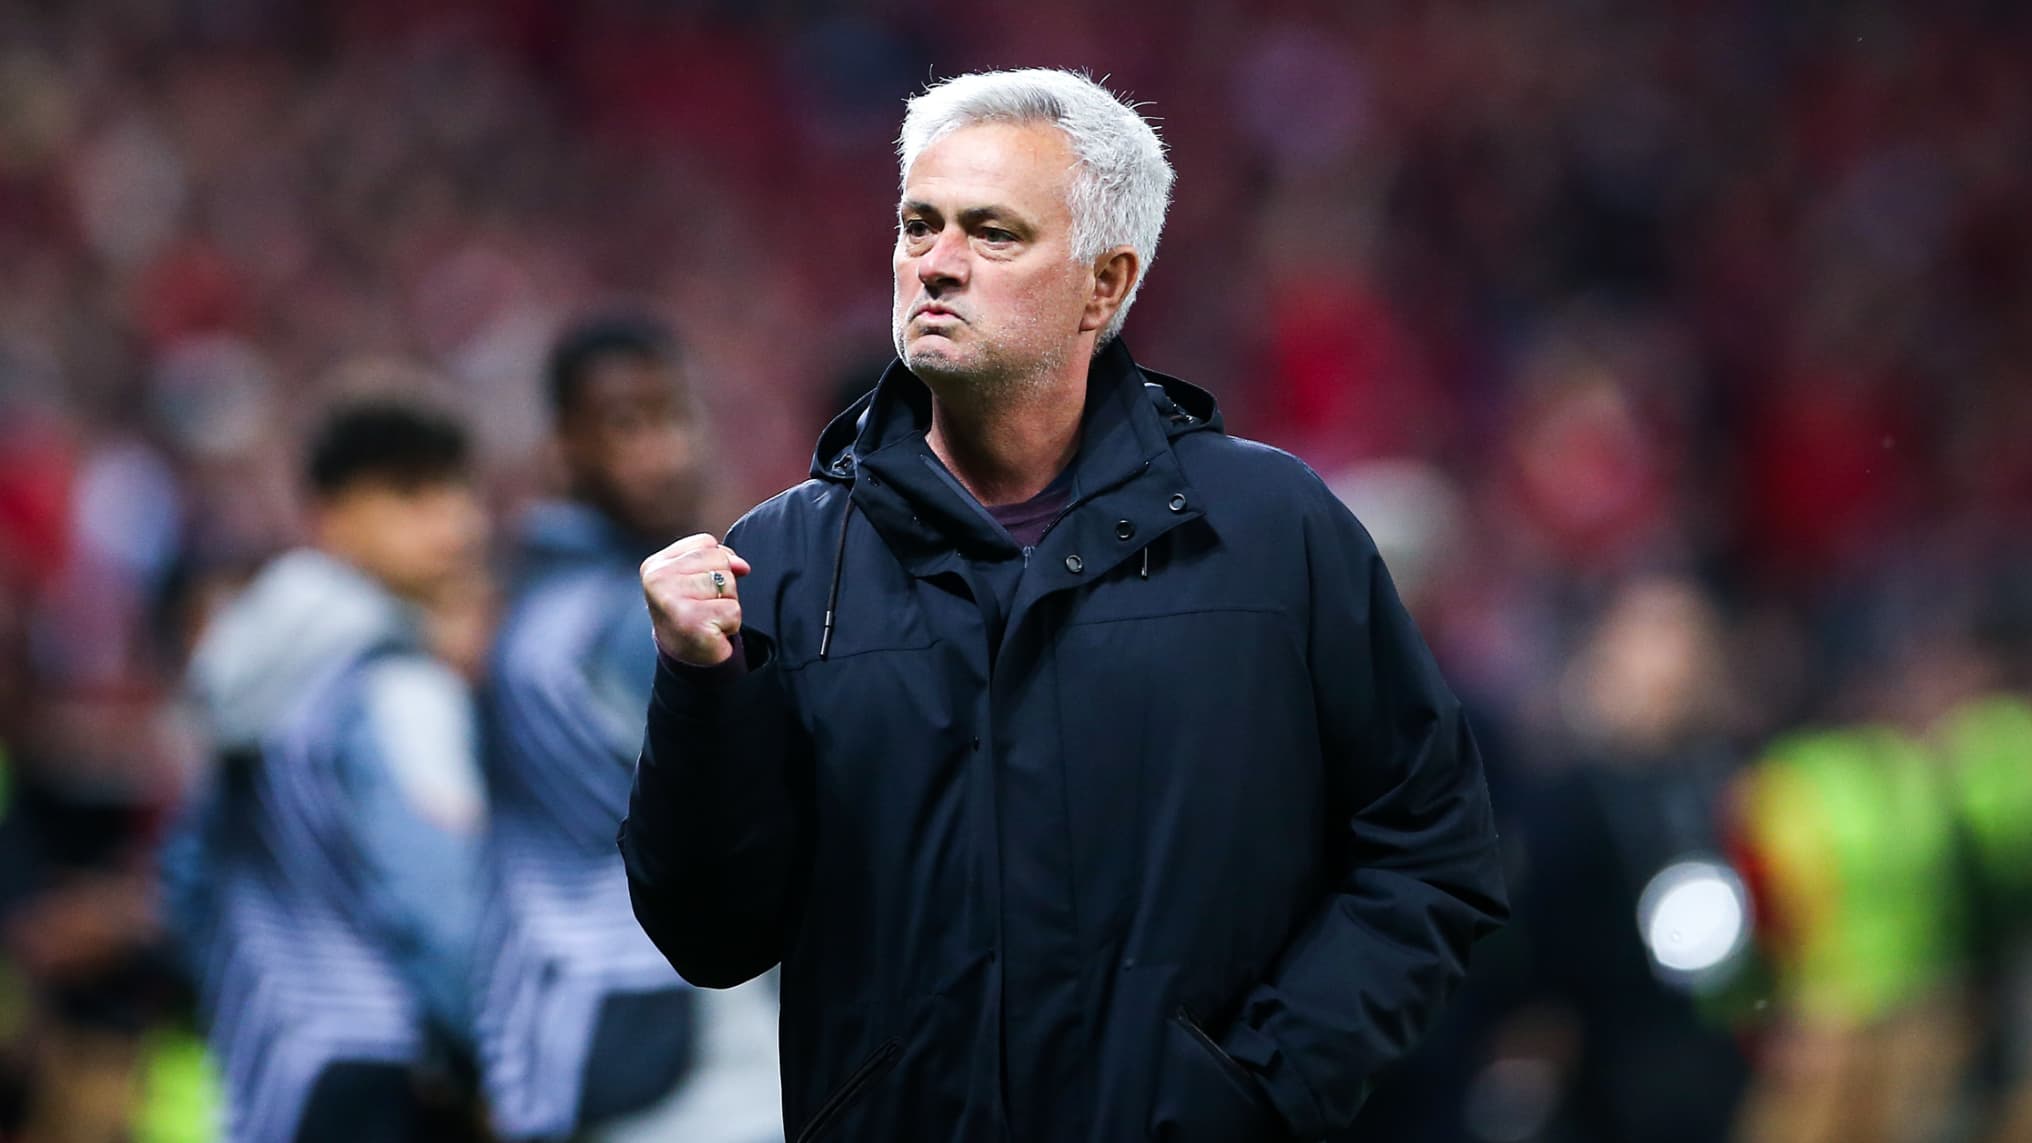 “The story is not over yet,” warned Mourinho ahead of his second final with Roma